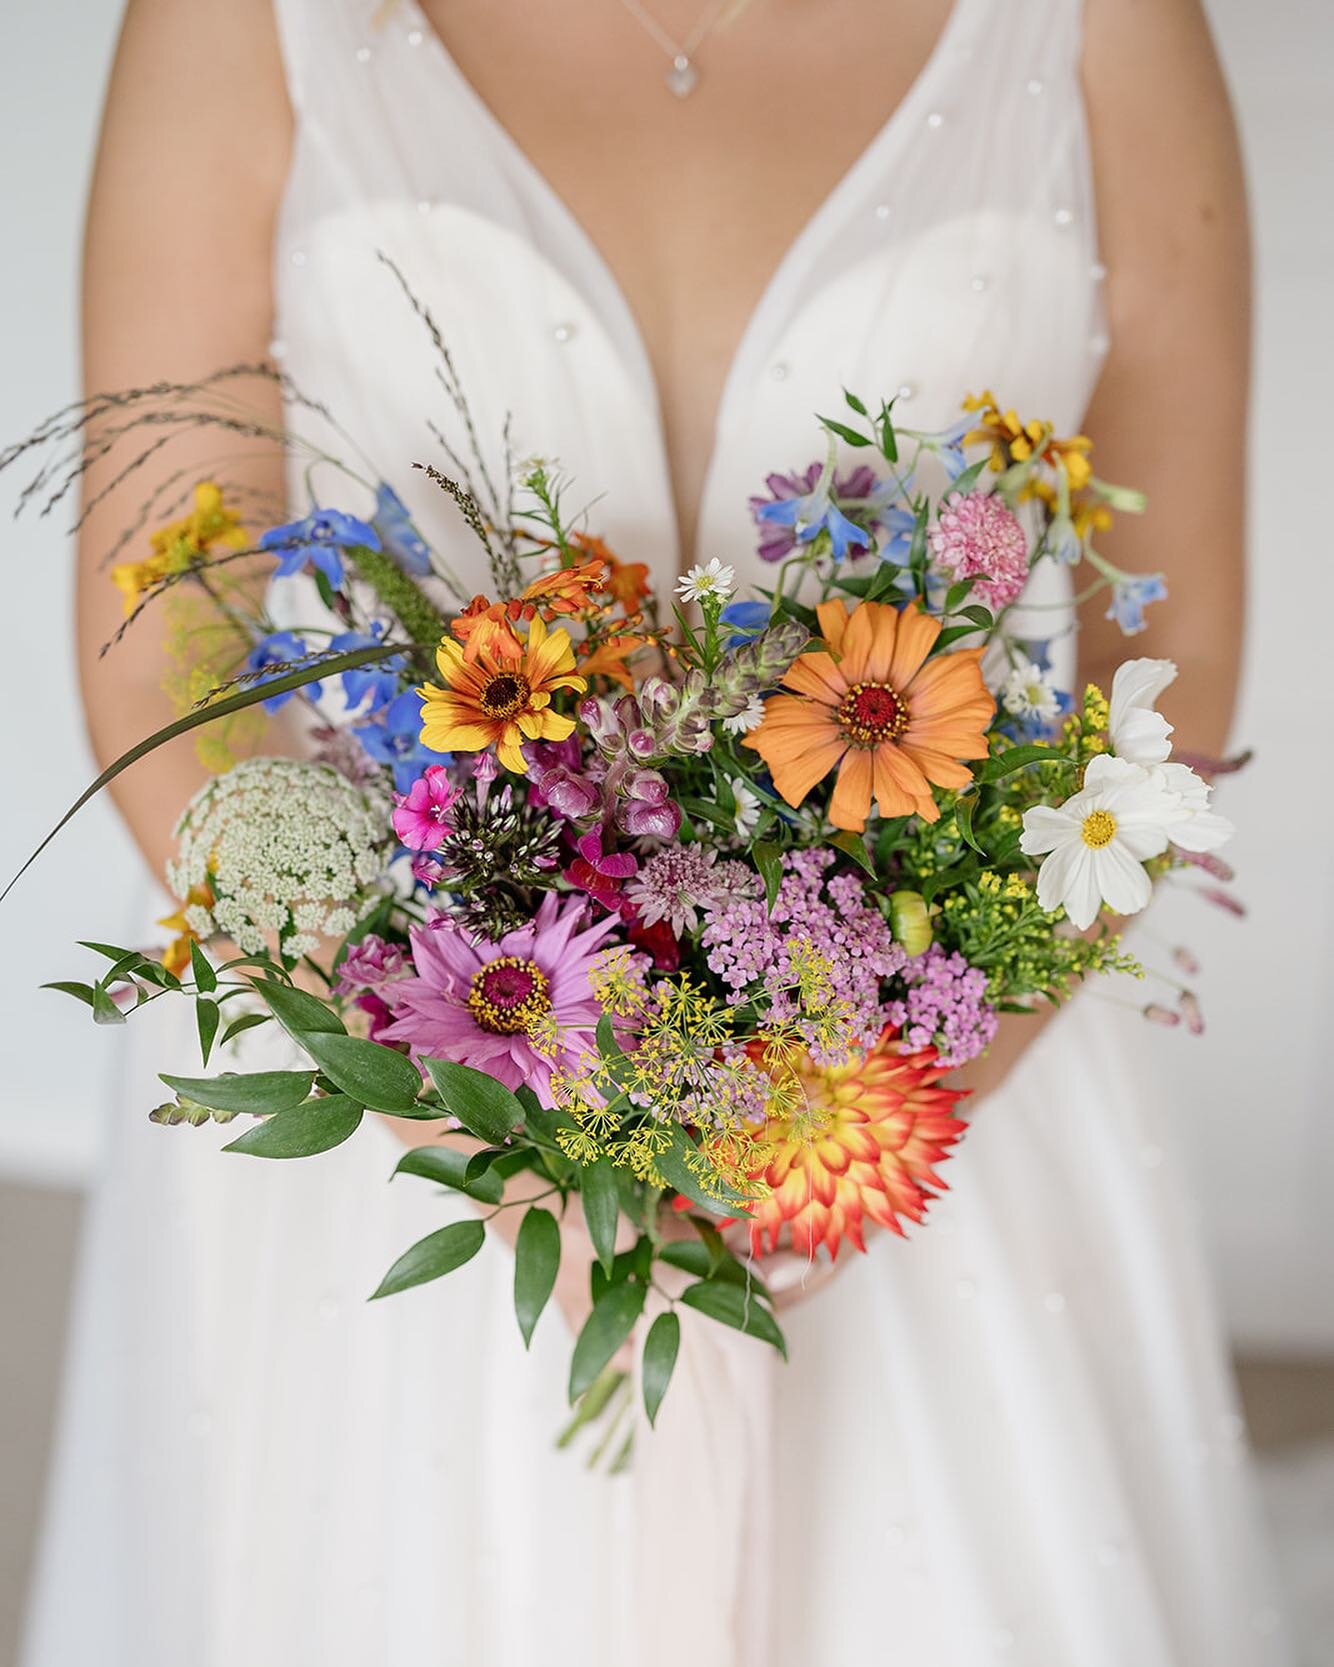 A wildflower wedding bouquet from late August 💐 a burst of colour and different textures is guaranteed with these locally grown Sussex flowers. Rebecca choose this loose natural style to compliment her wedding in the beautiful loggia and gardens at 